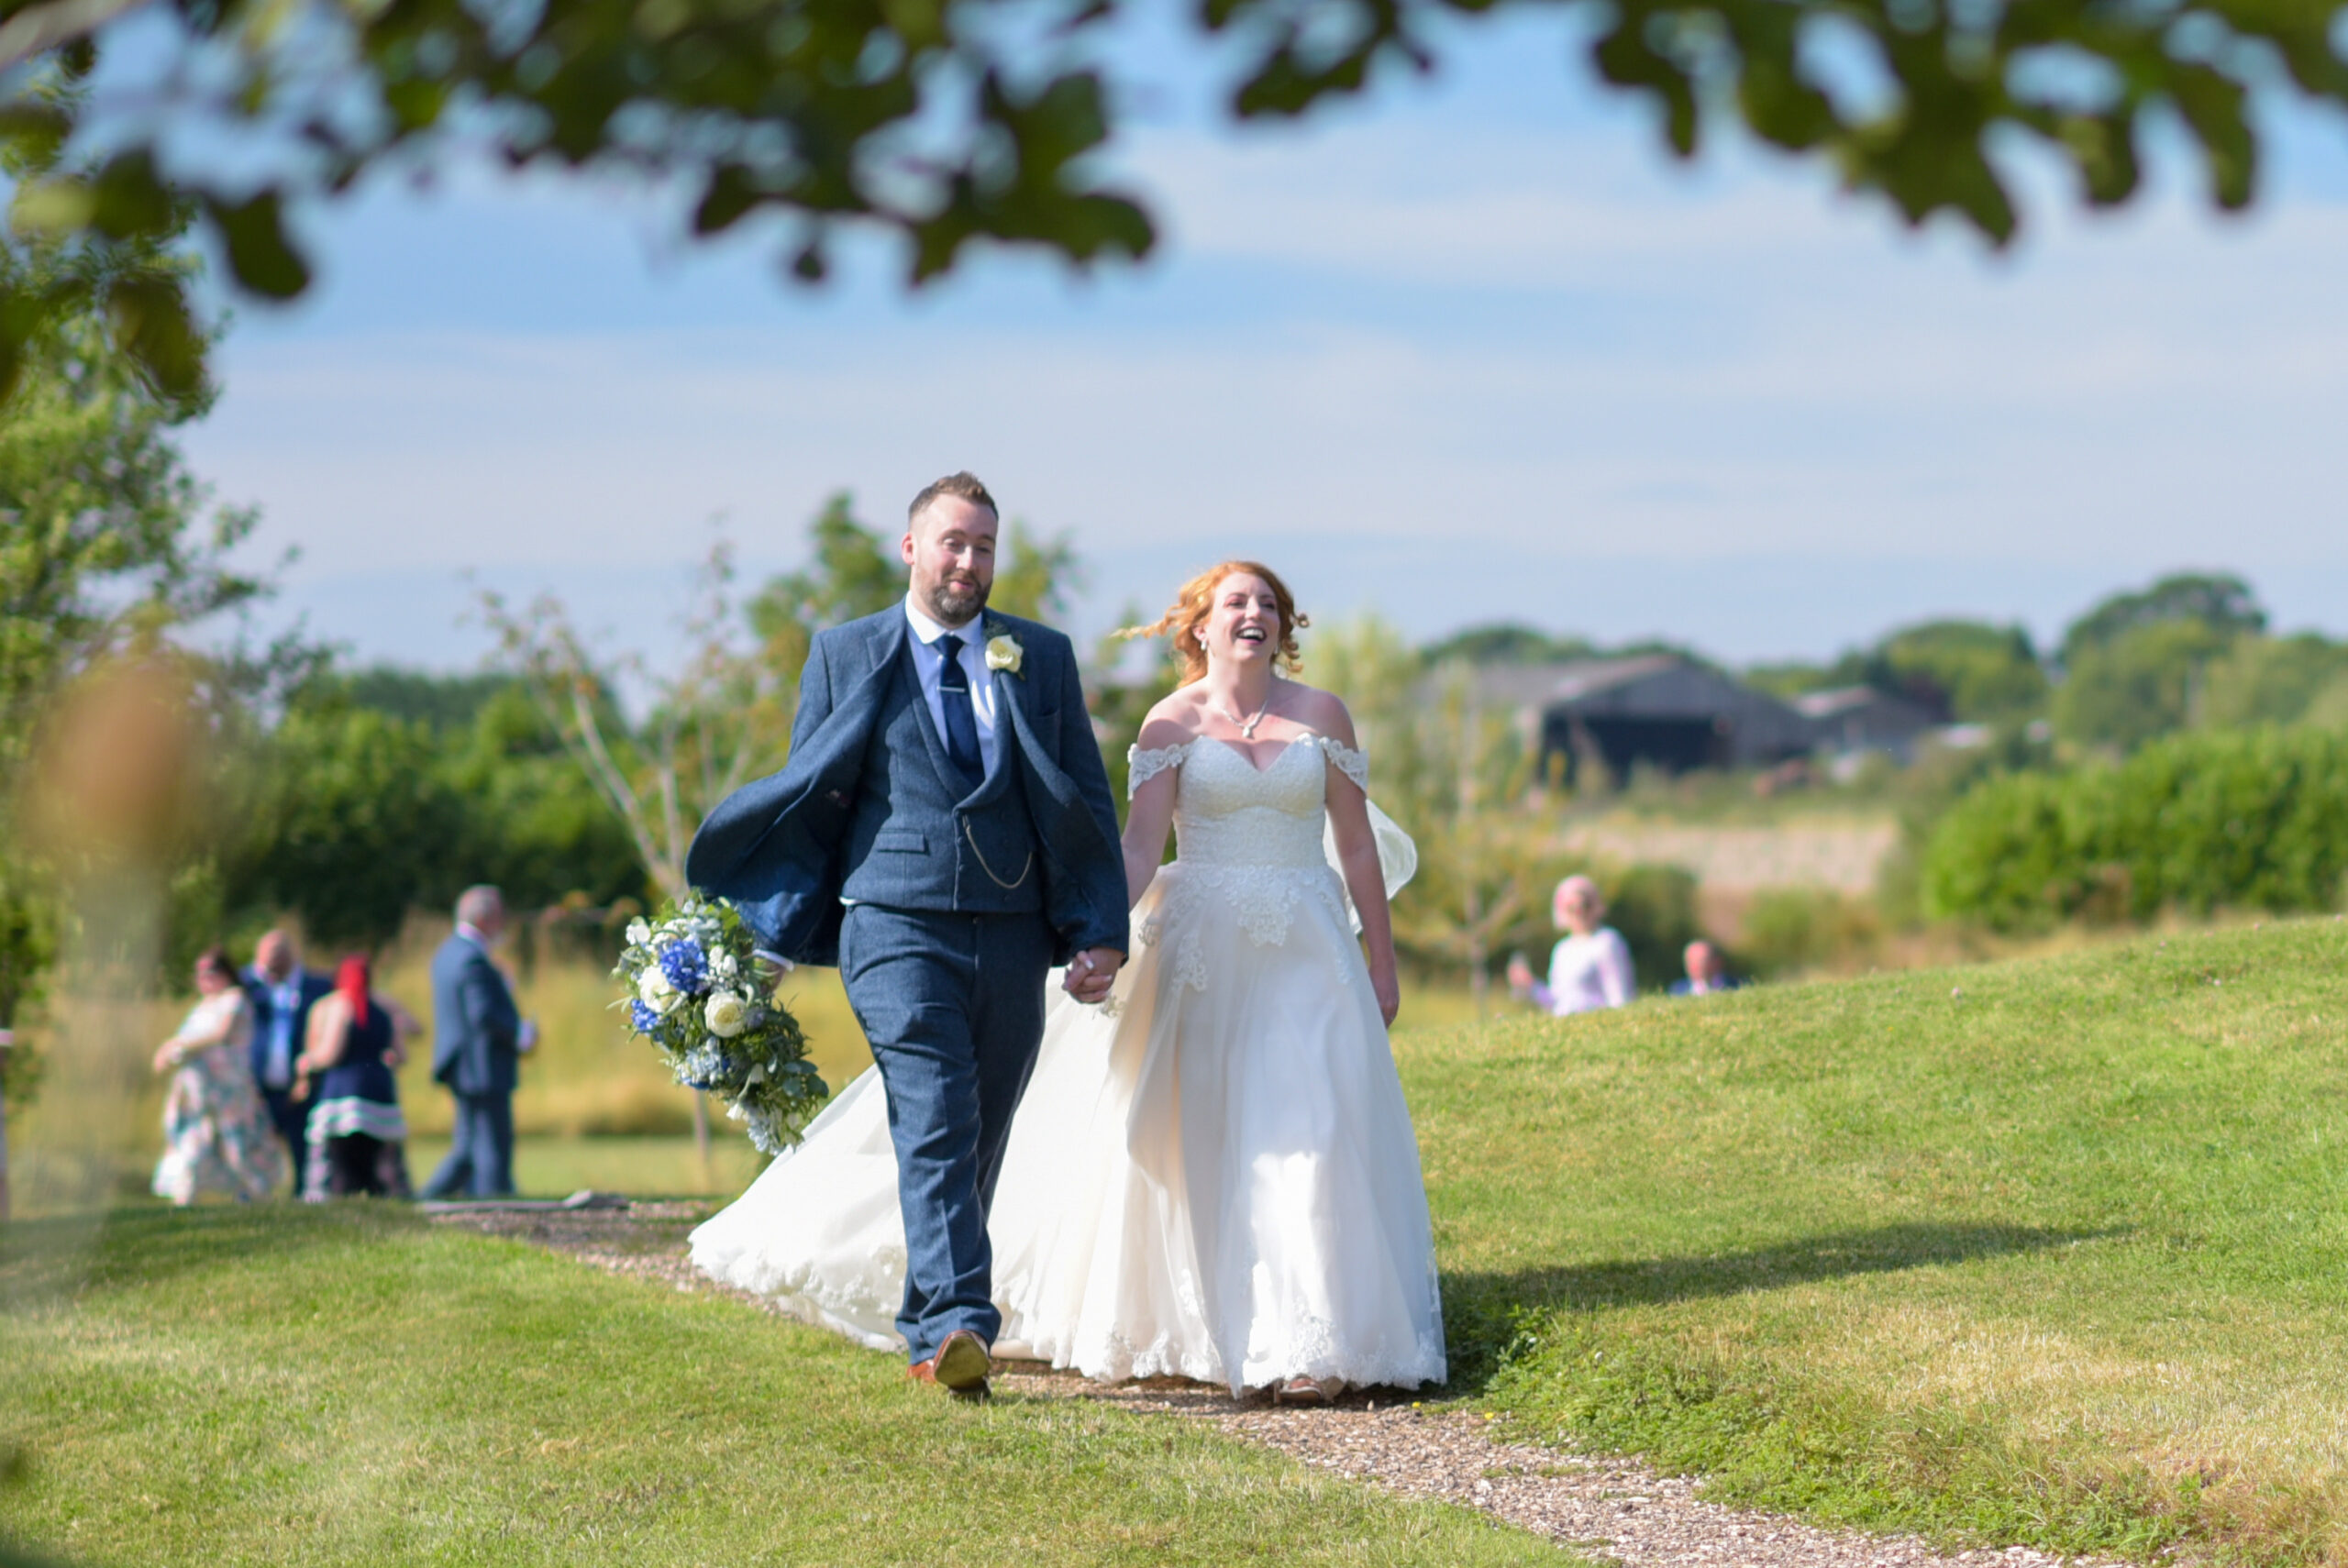 Wedding Photography in the grounds at Wootton Park